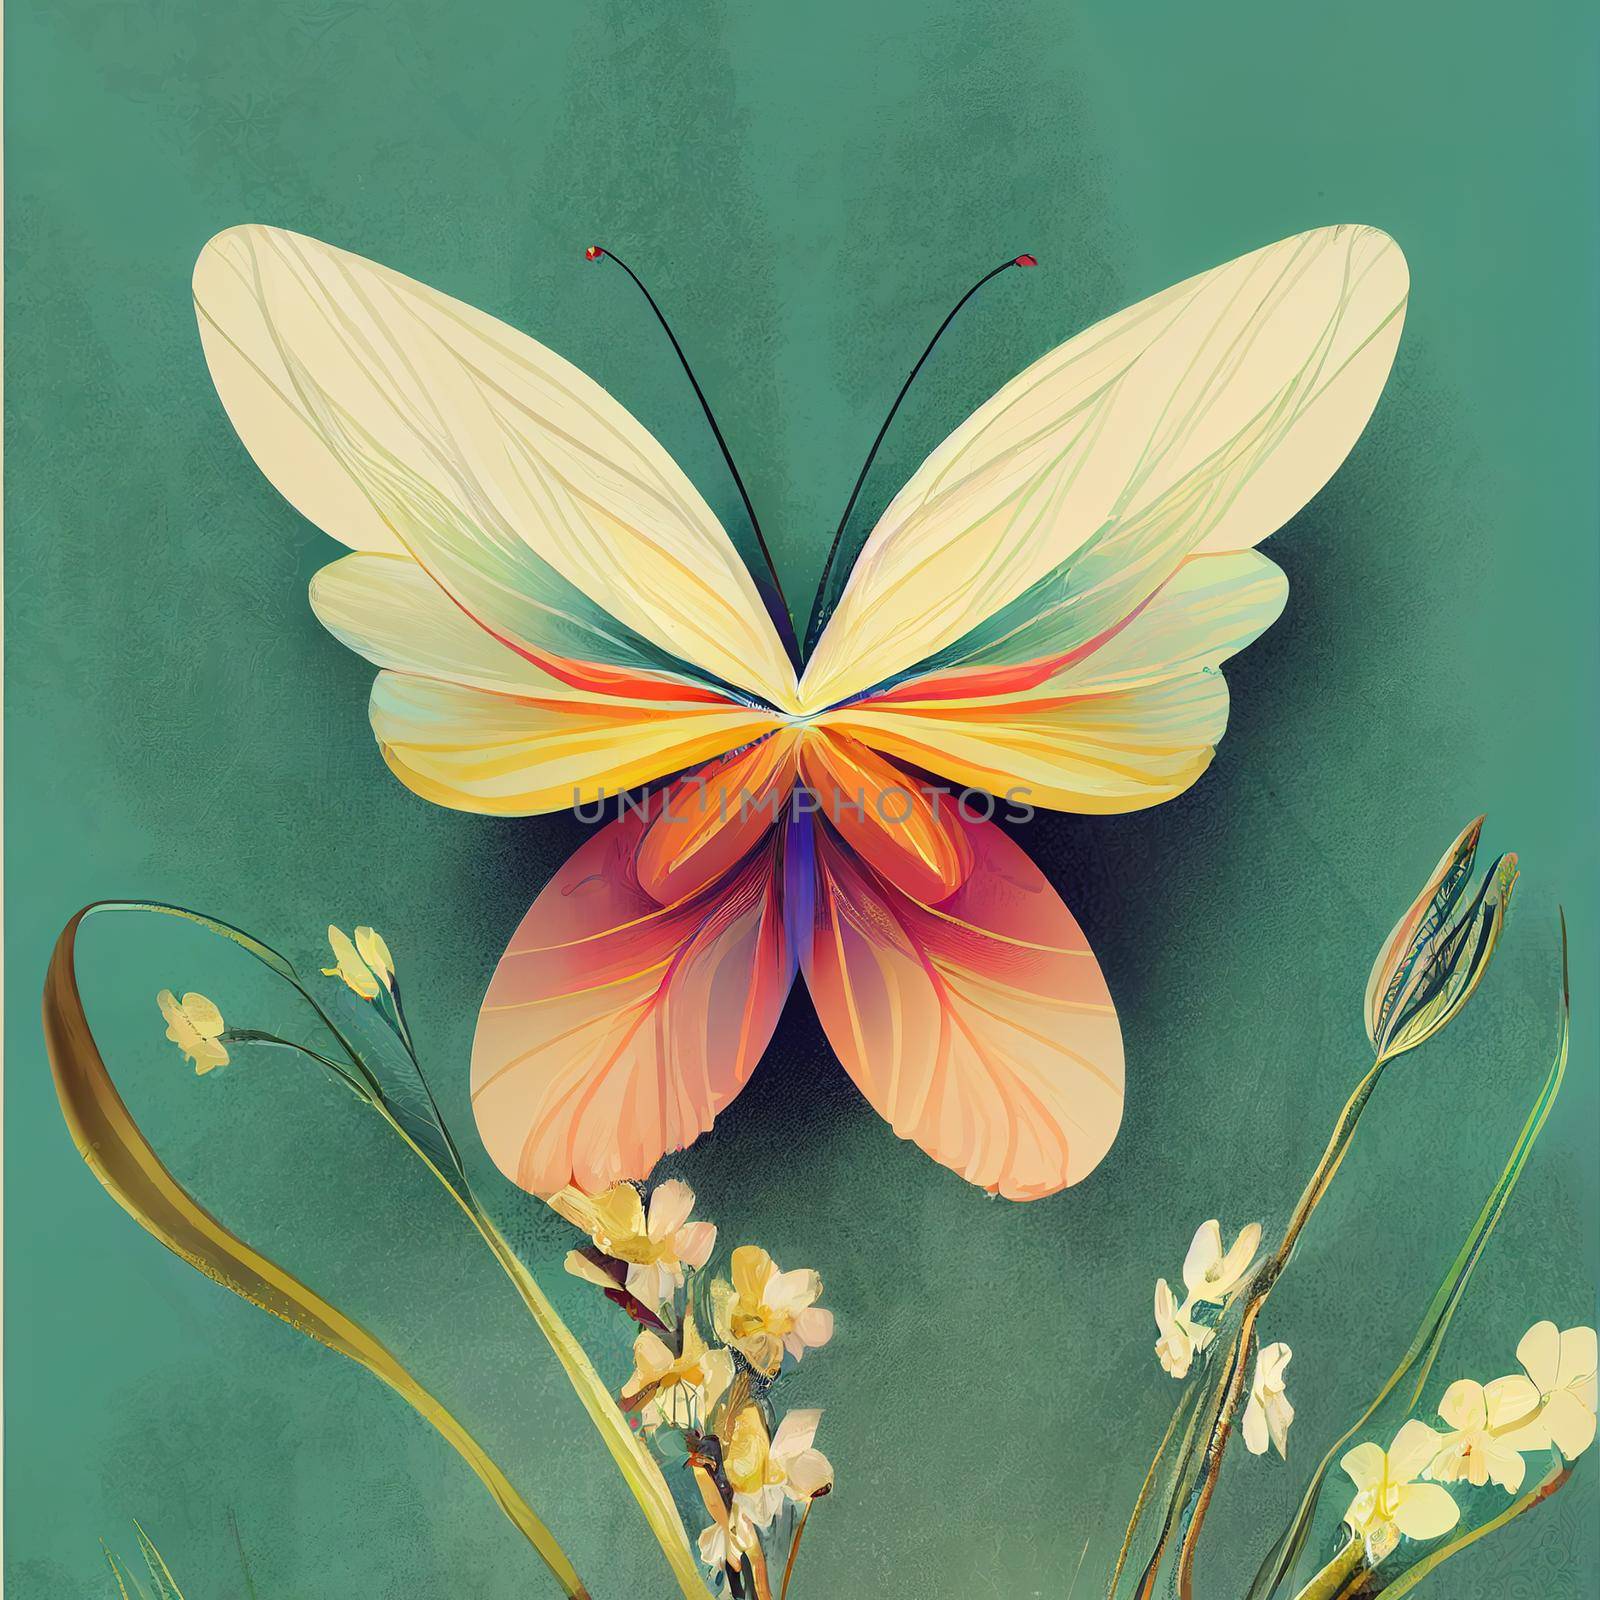 Beautiful spring creative art work illustration with flowers and butterfly by 2ragon